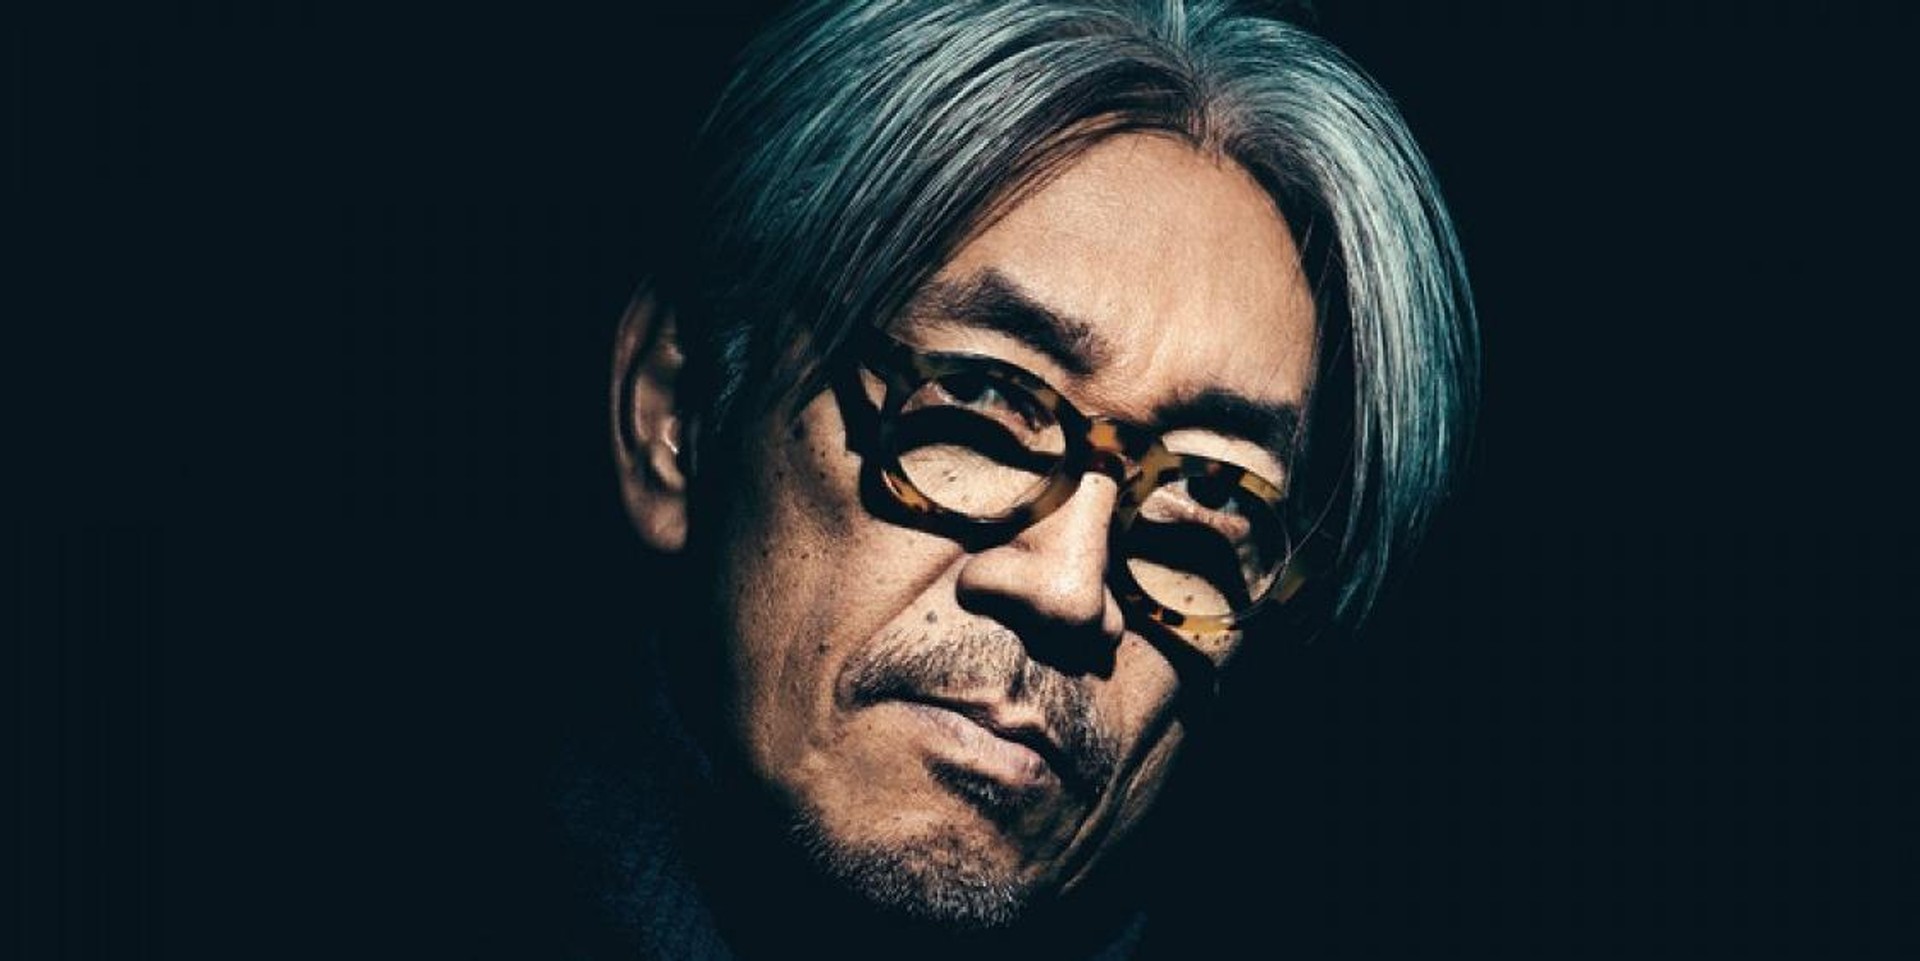 Limited tickets to Ryuichi Sakamoto's SIFA show to be released 